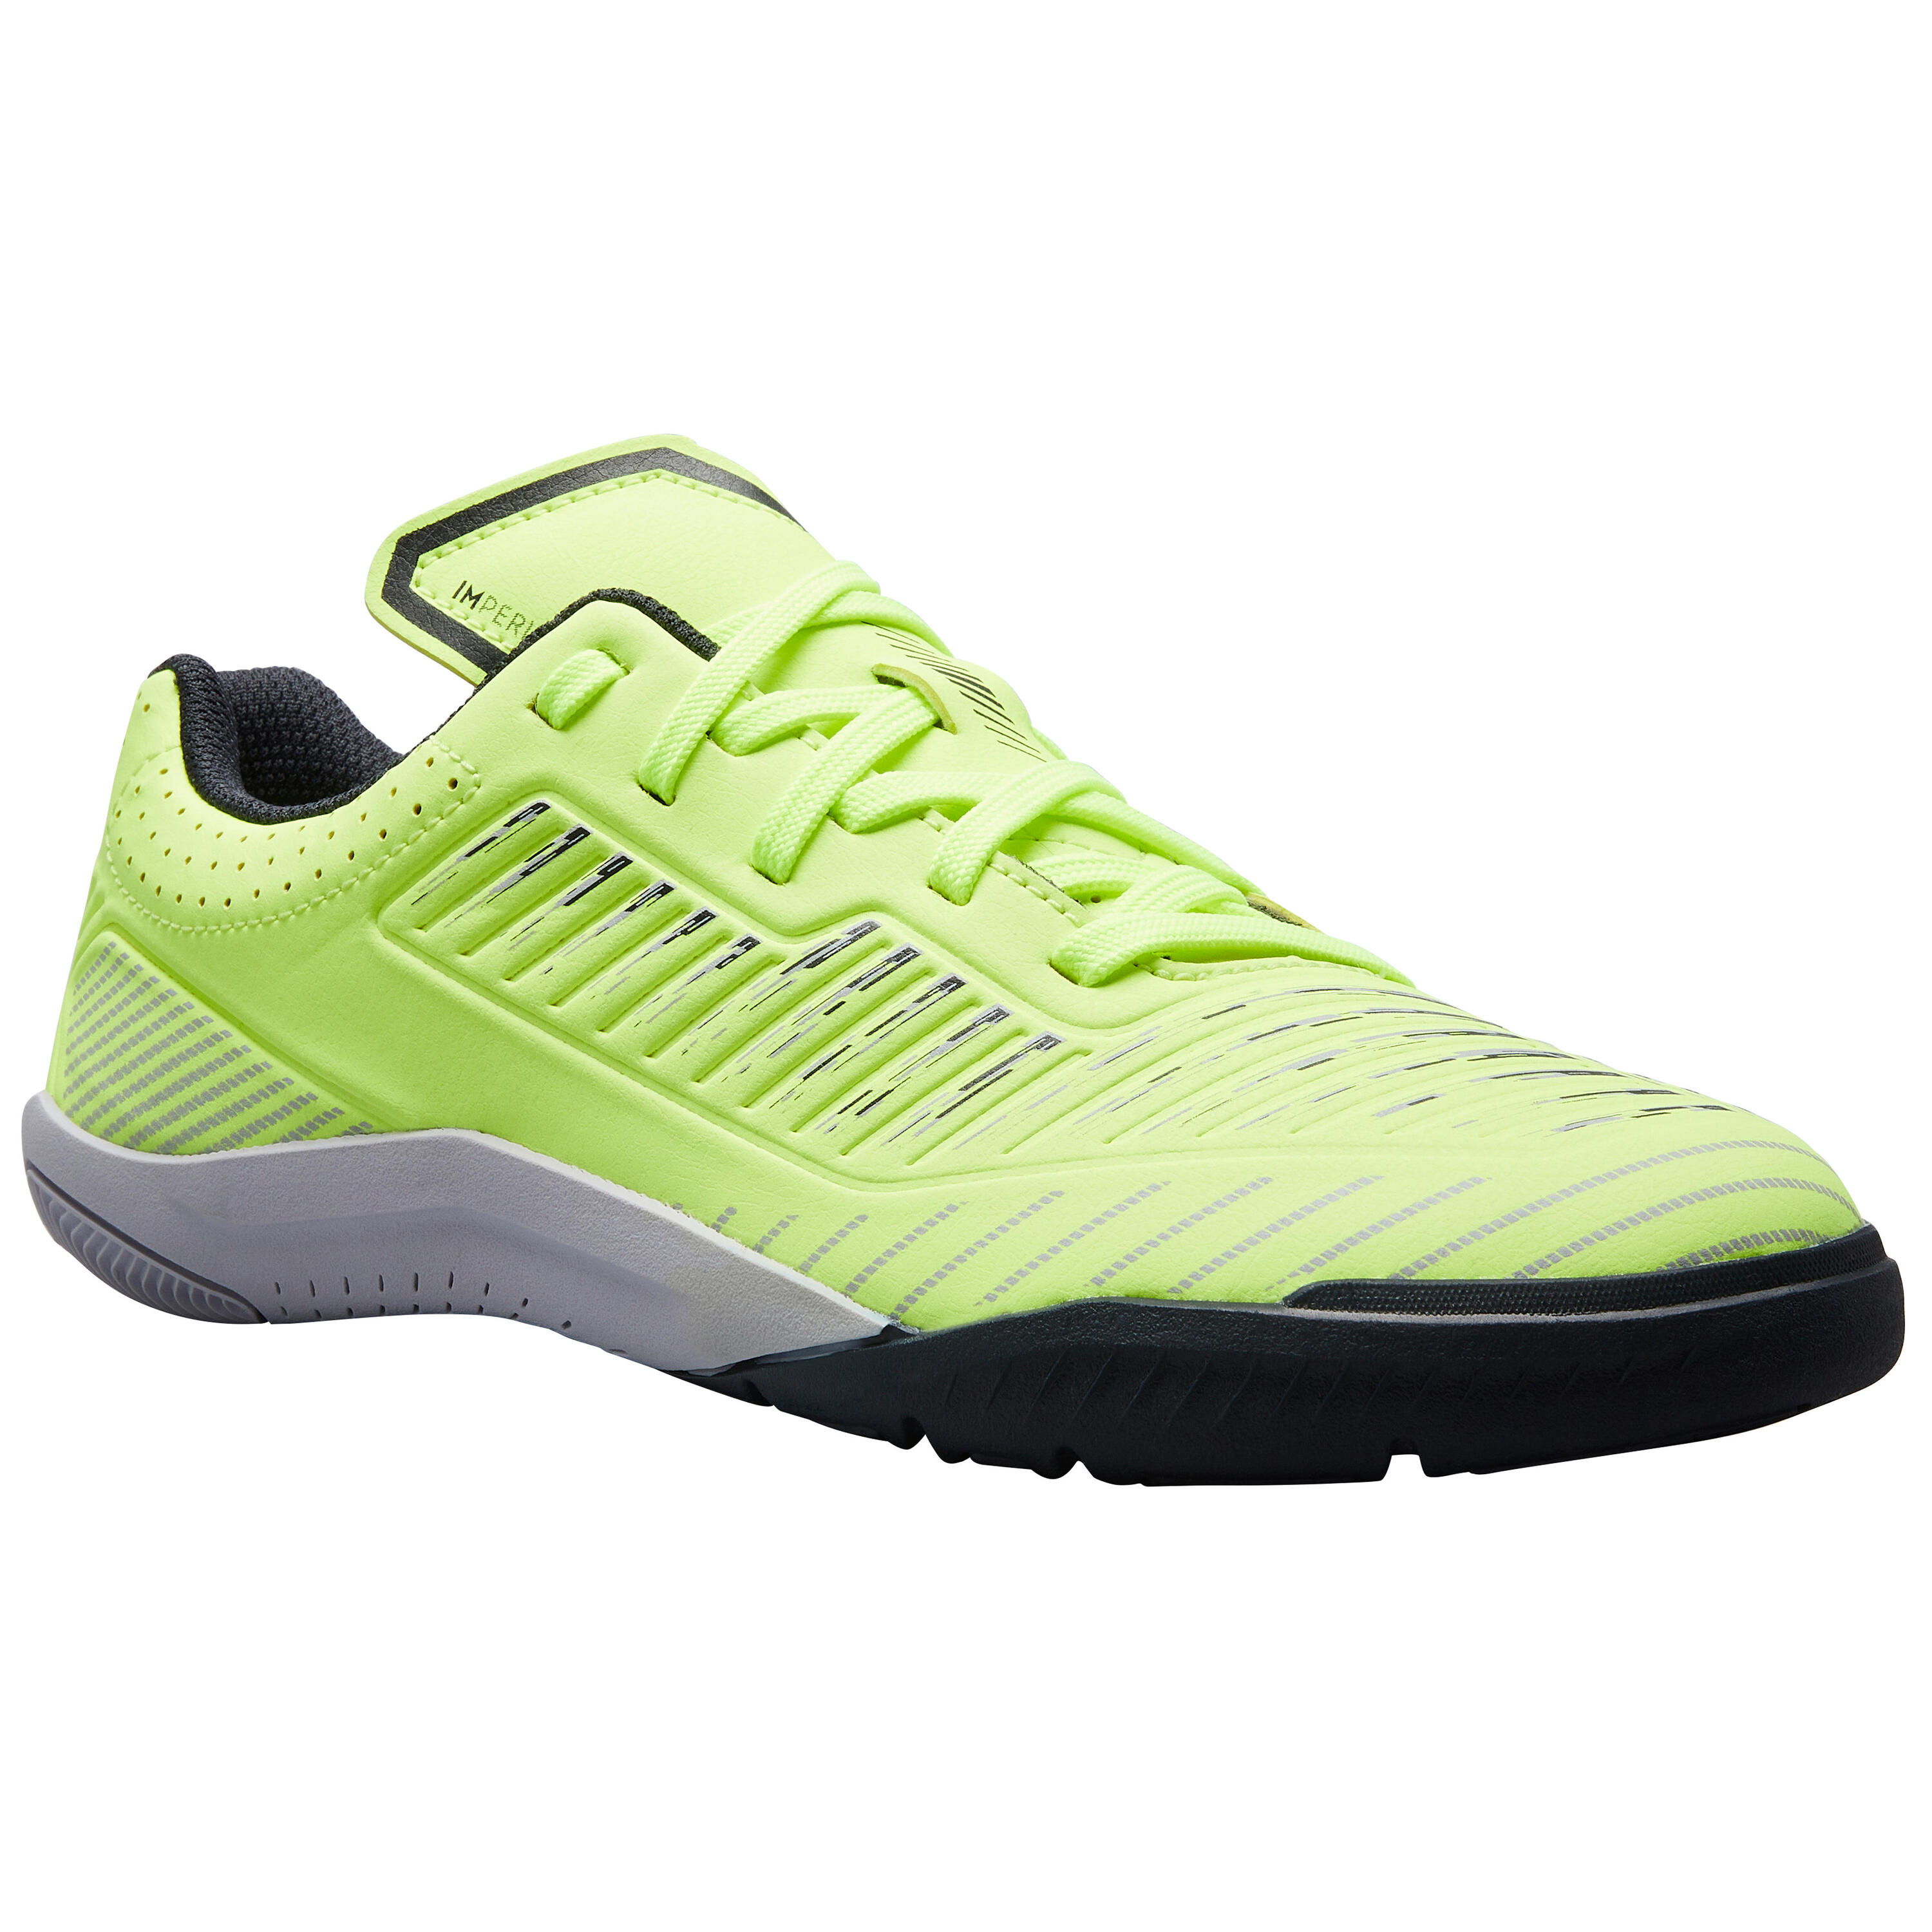 fluo lime yellow / pale grey / graphite grey